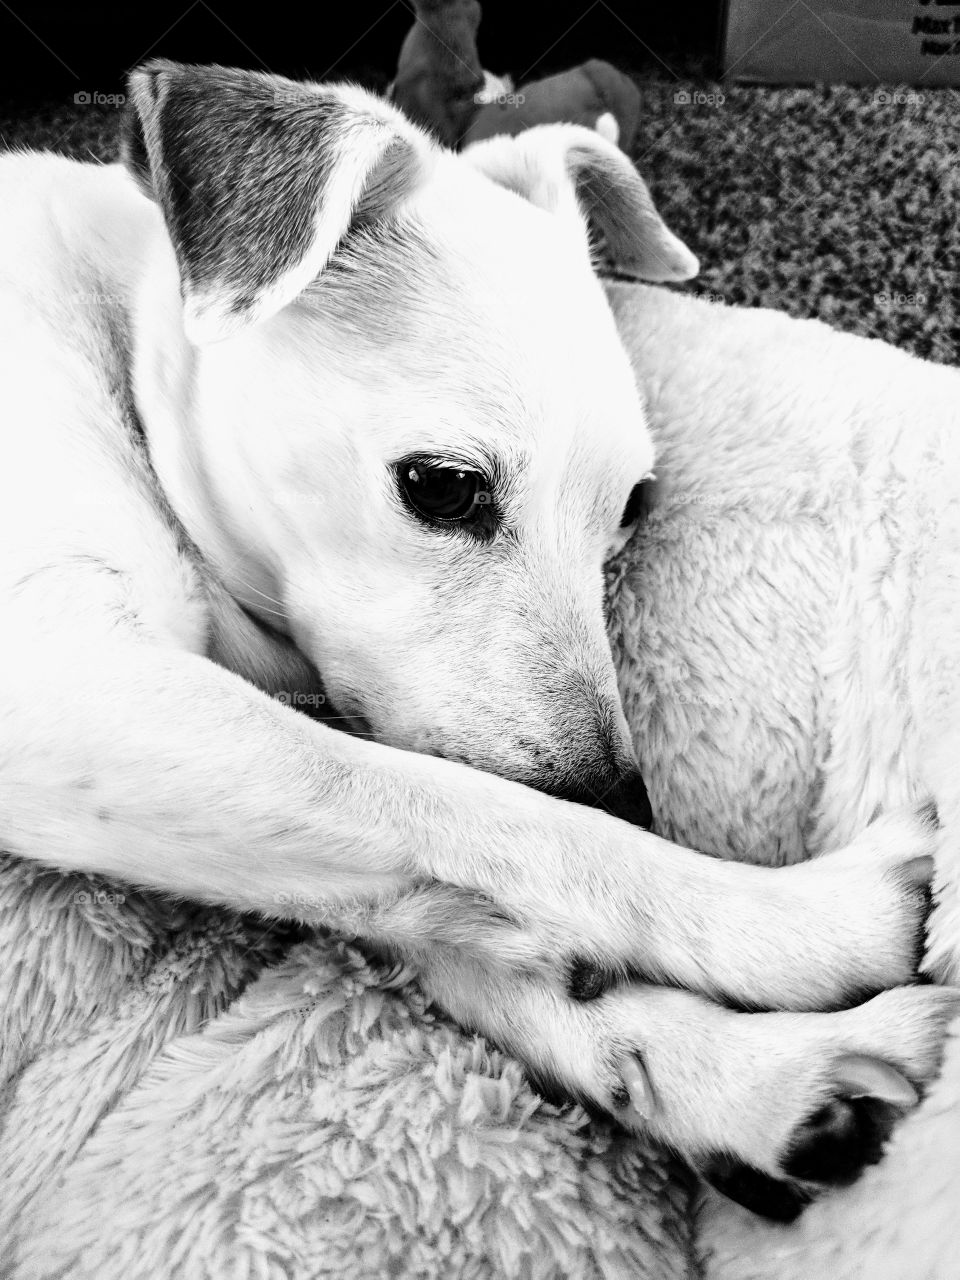 Jack Russell dog in black and white